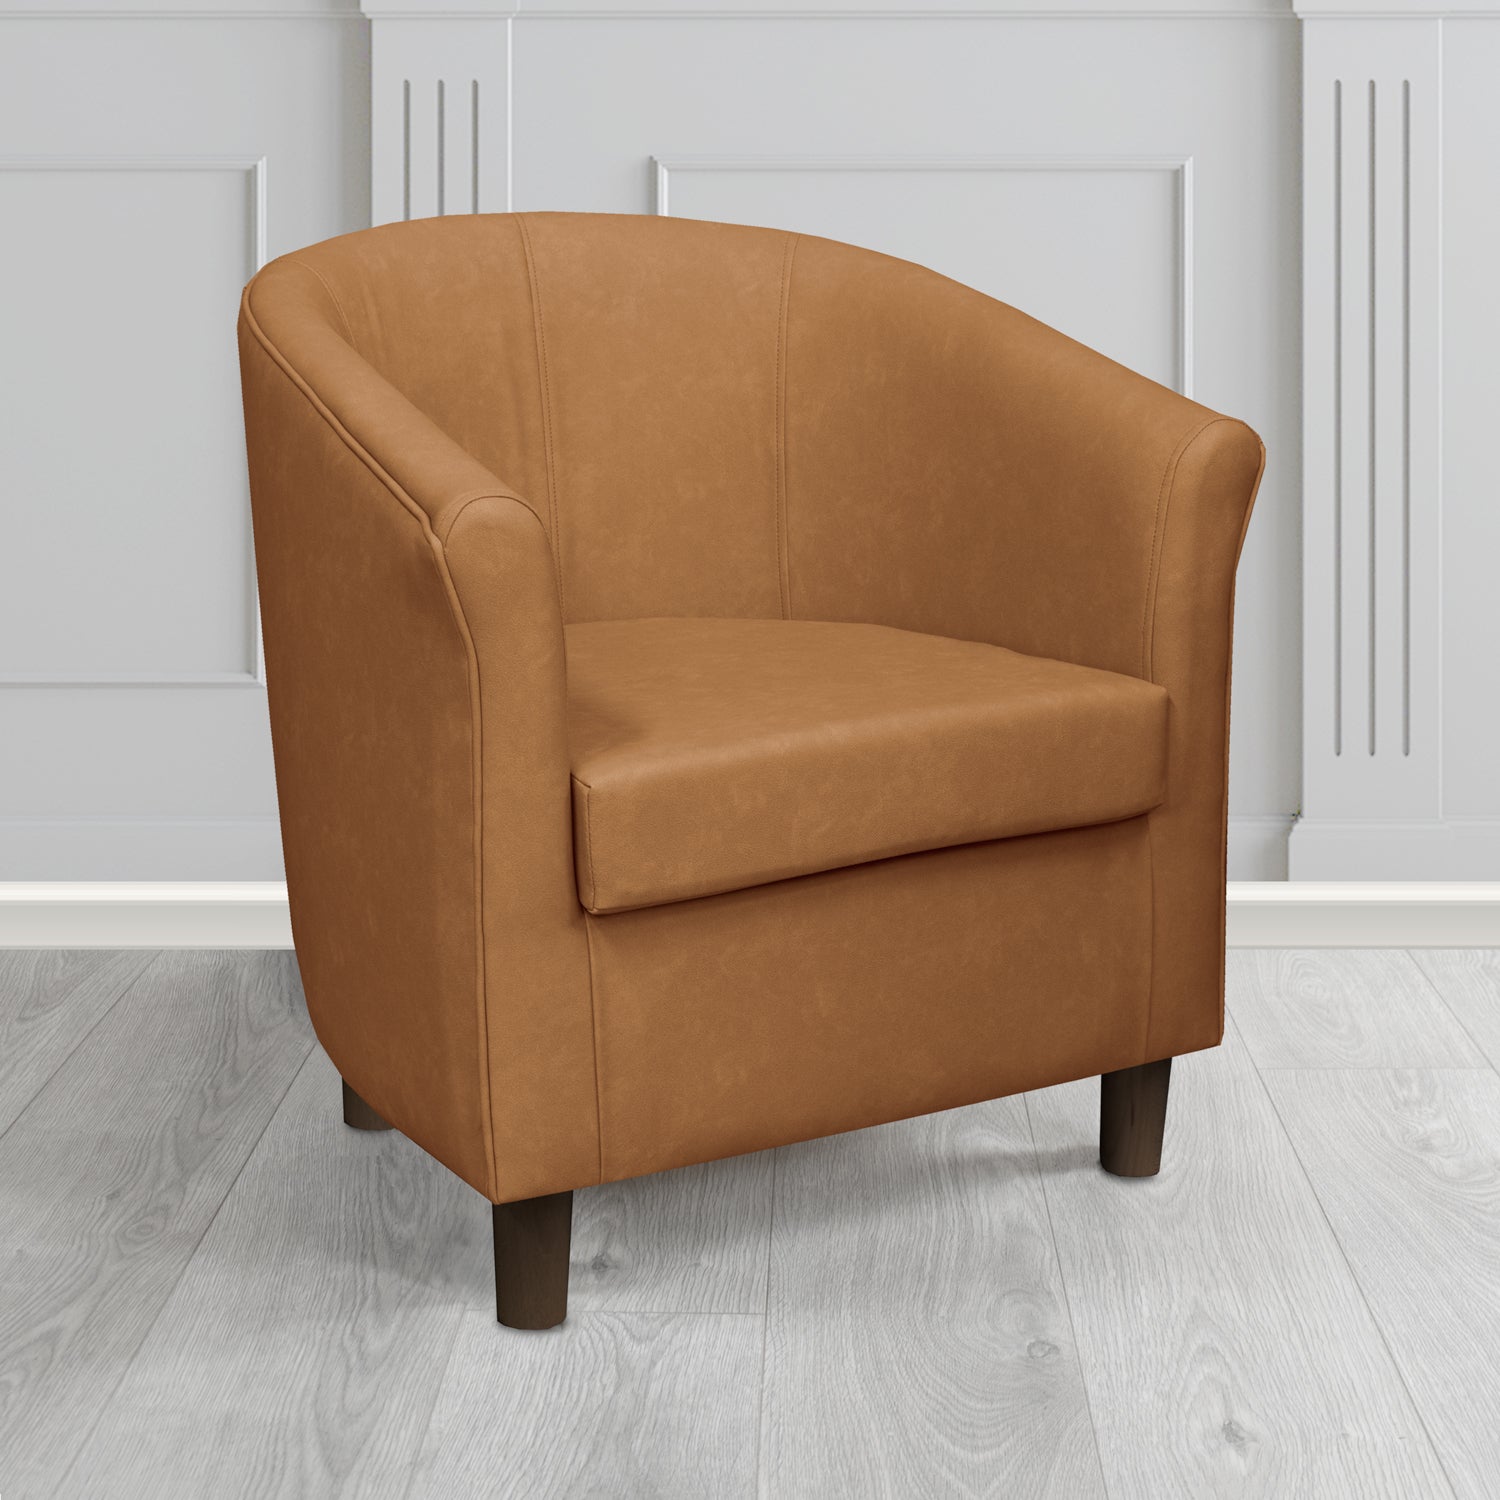 Tuscany Tub Chair in Infiniti Camel INF1849 Antimicrobial Crib 5 Faux Leather - The Tub Chair Shop